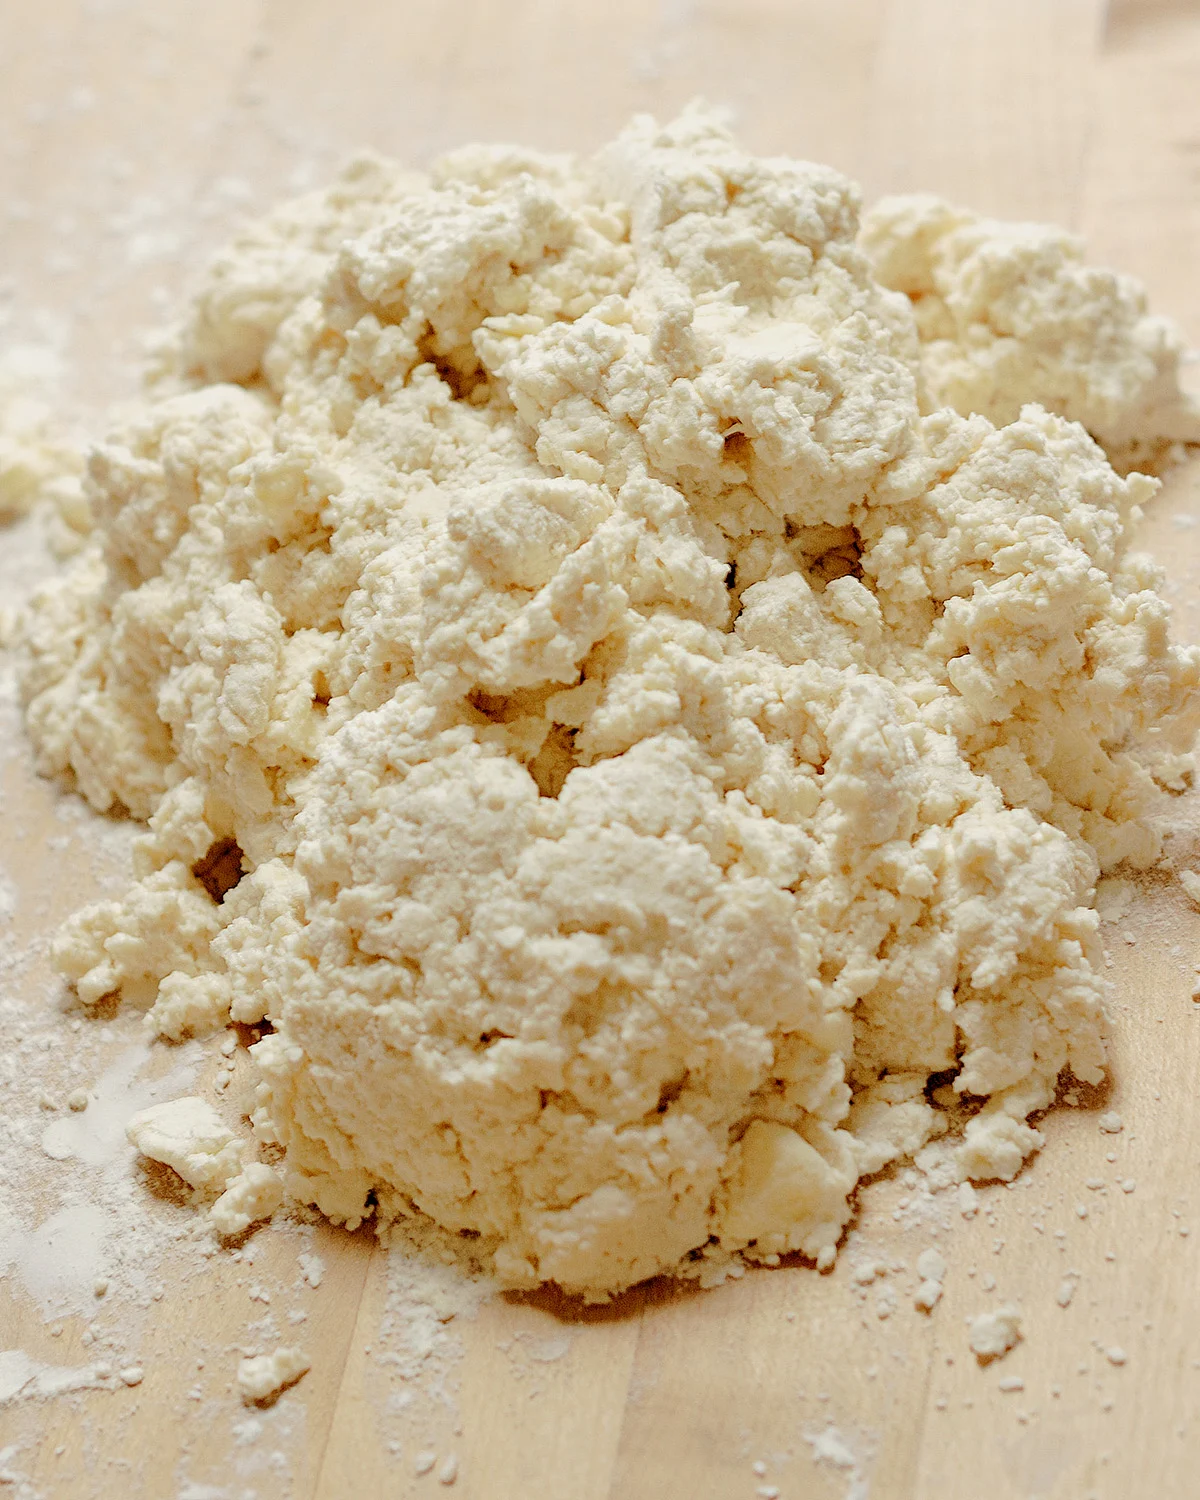 a pile of loose biscuit dough on a wooden surface.